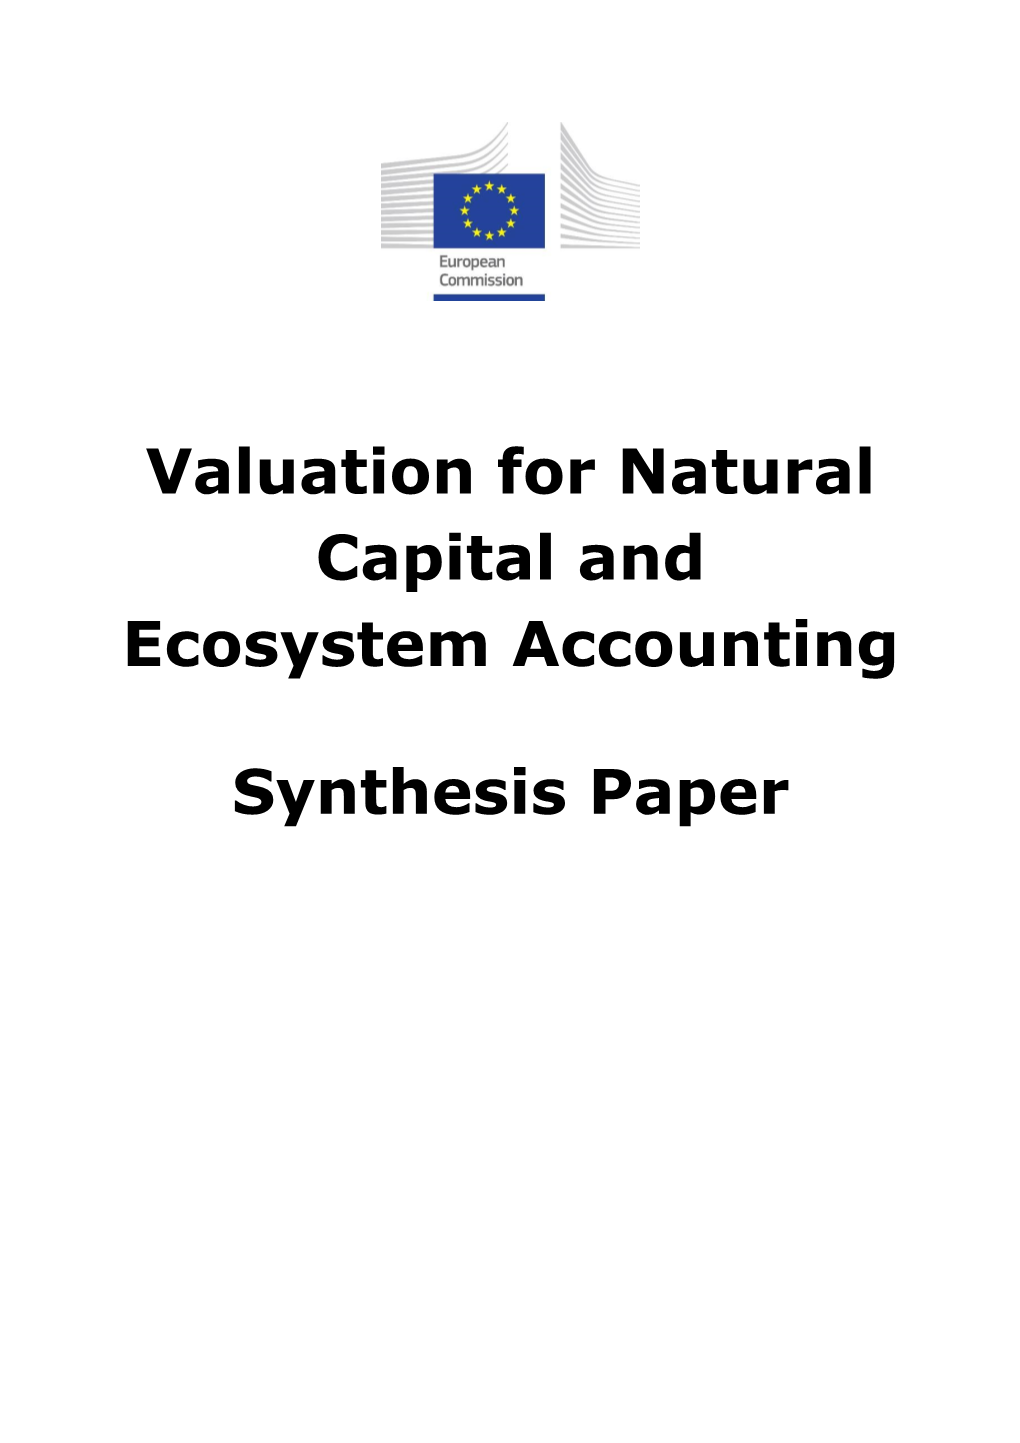 Valuation for Natural Capital and Ecosystem Accounting